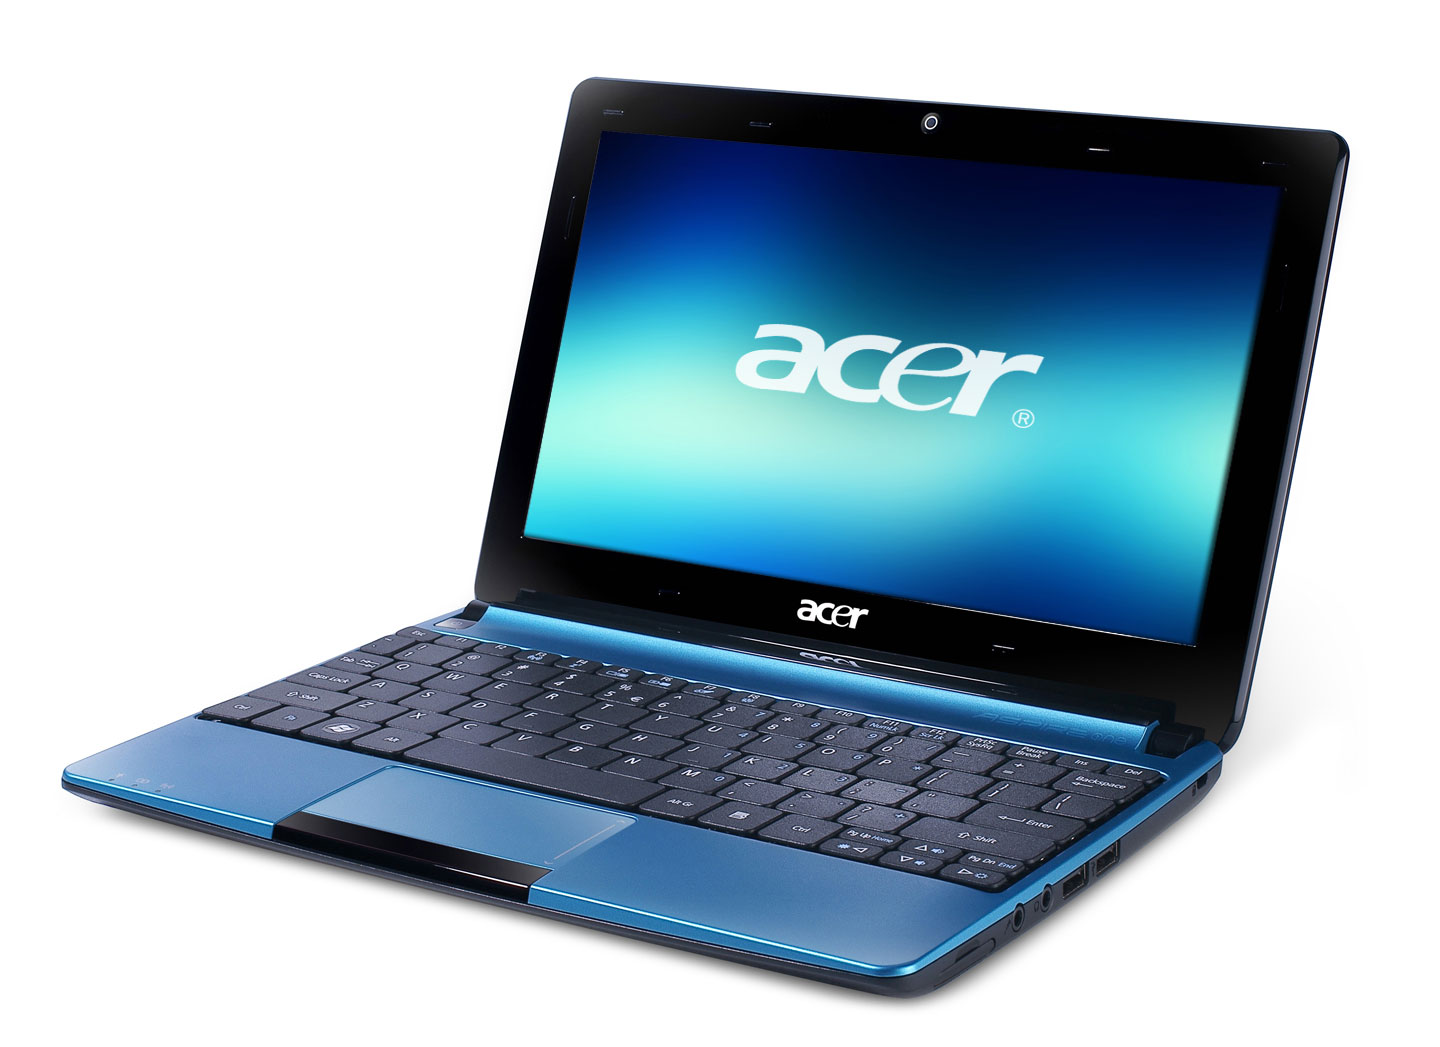 Drivers Notebook Acer Aspire One D270